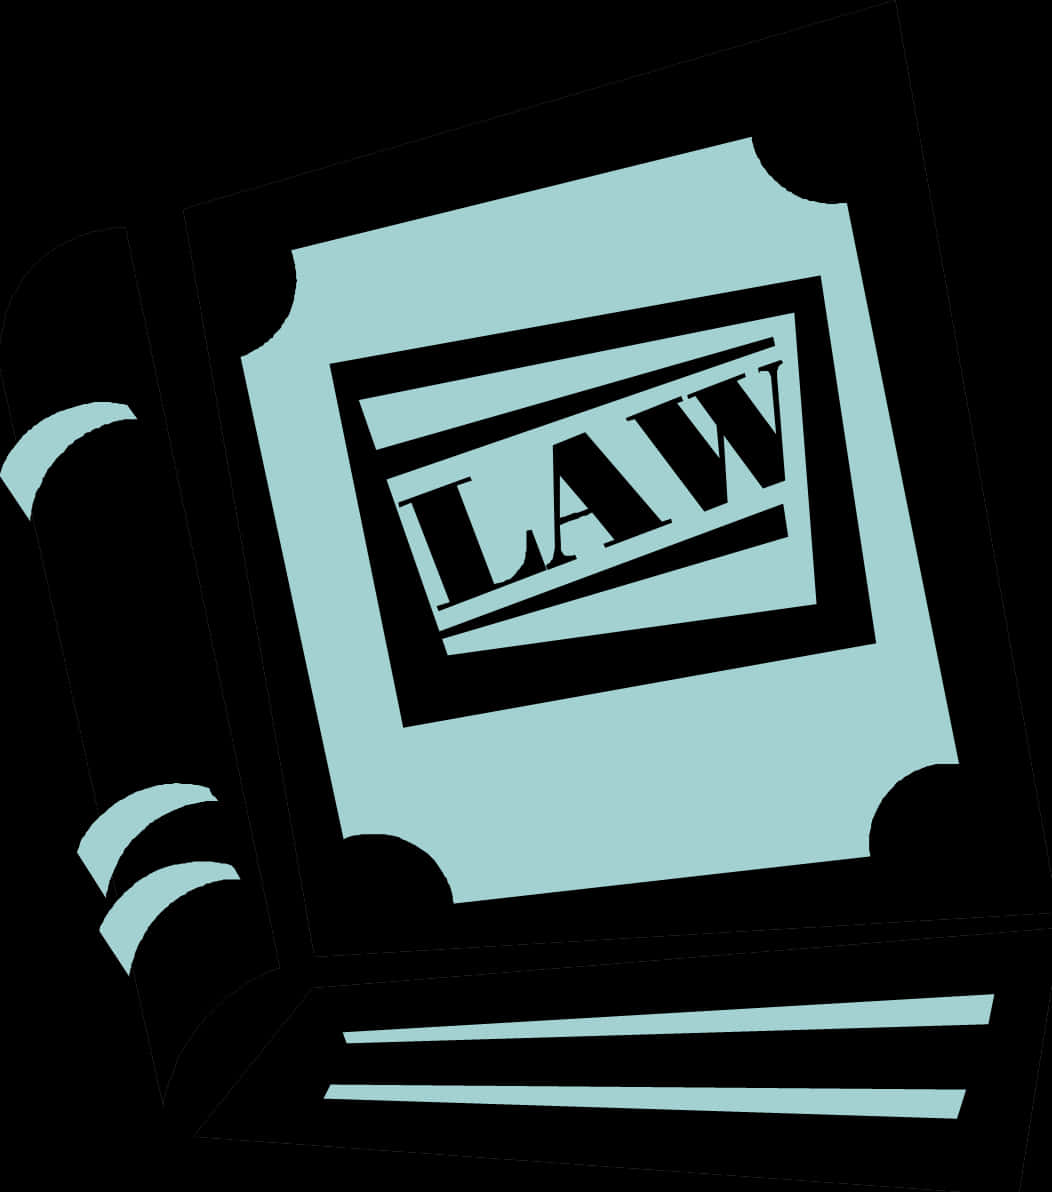 A Blue And Black Law Book